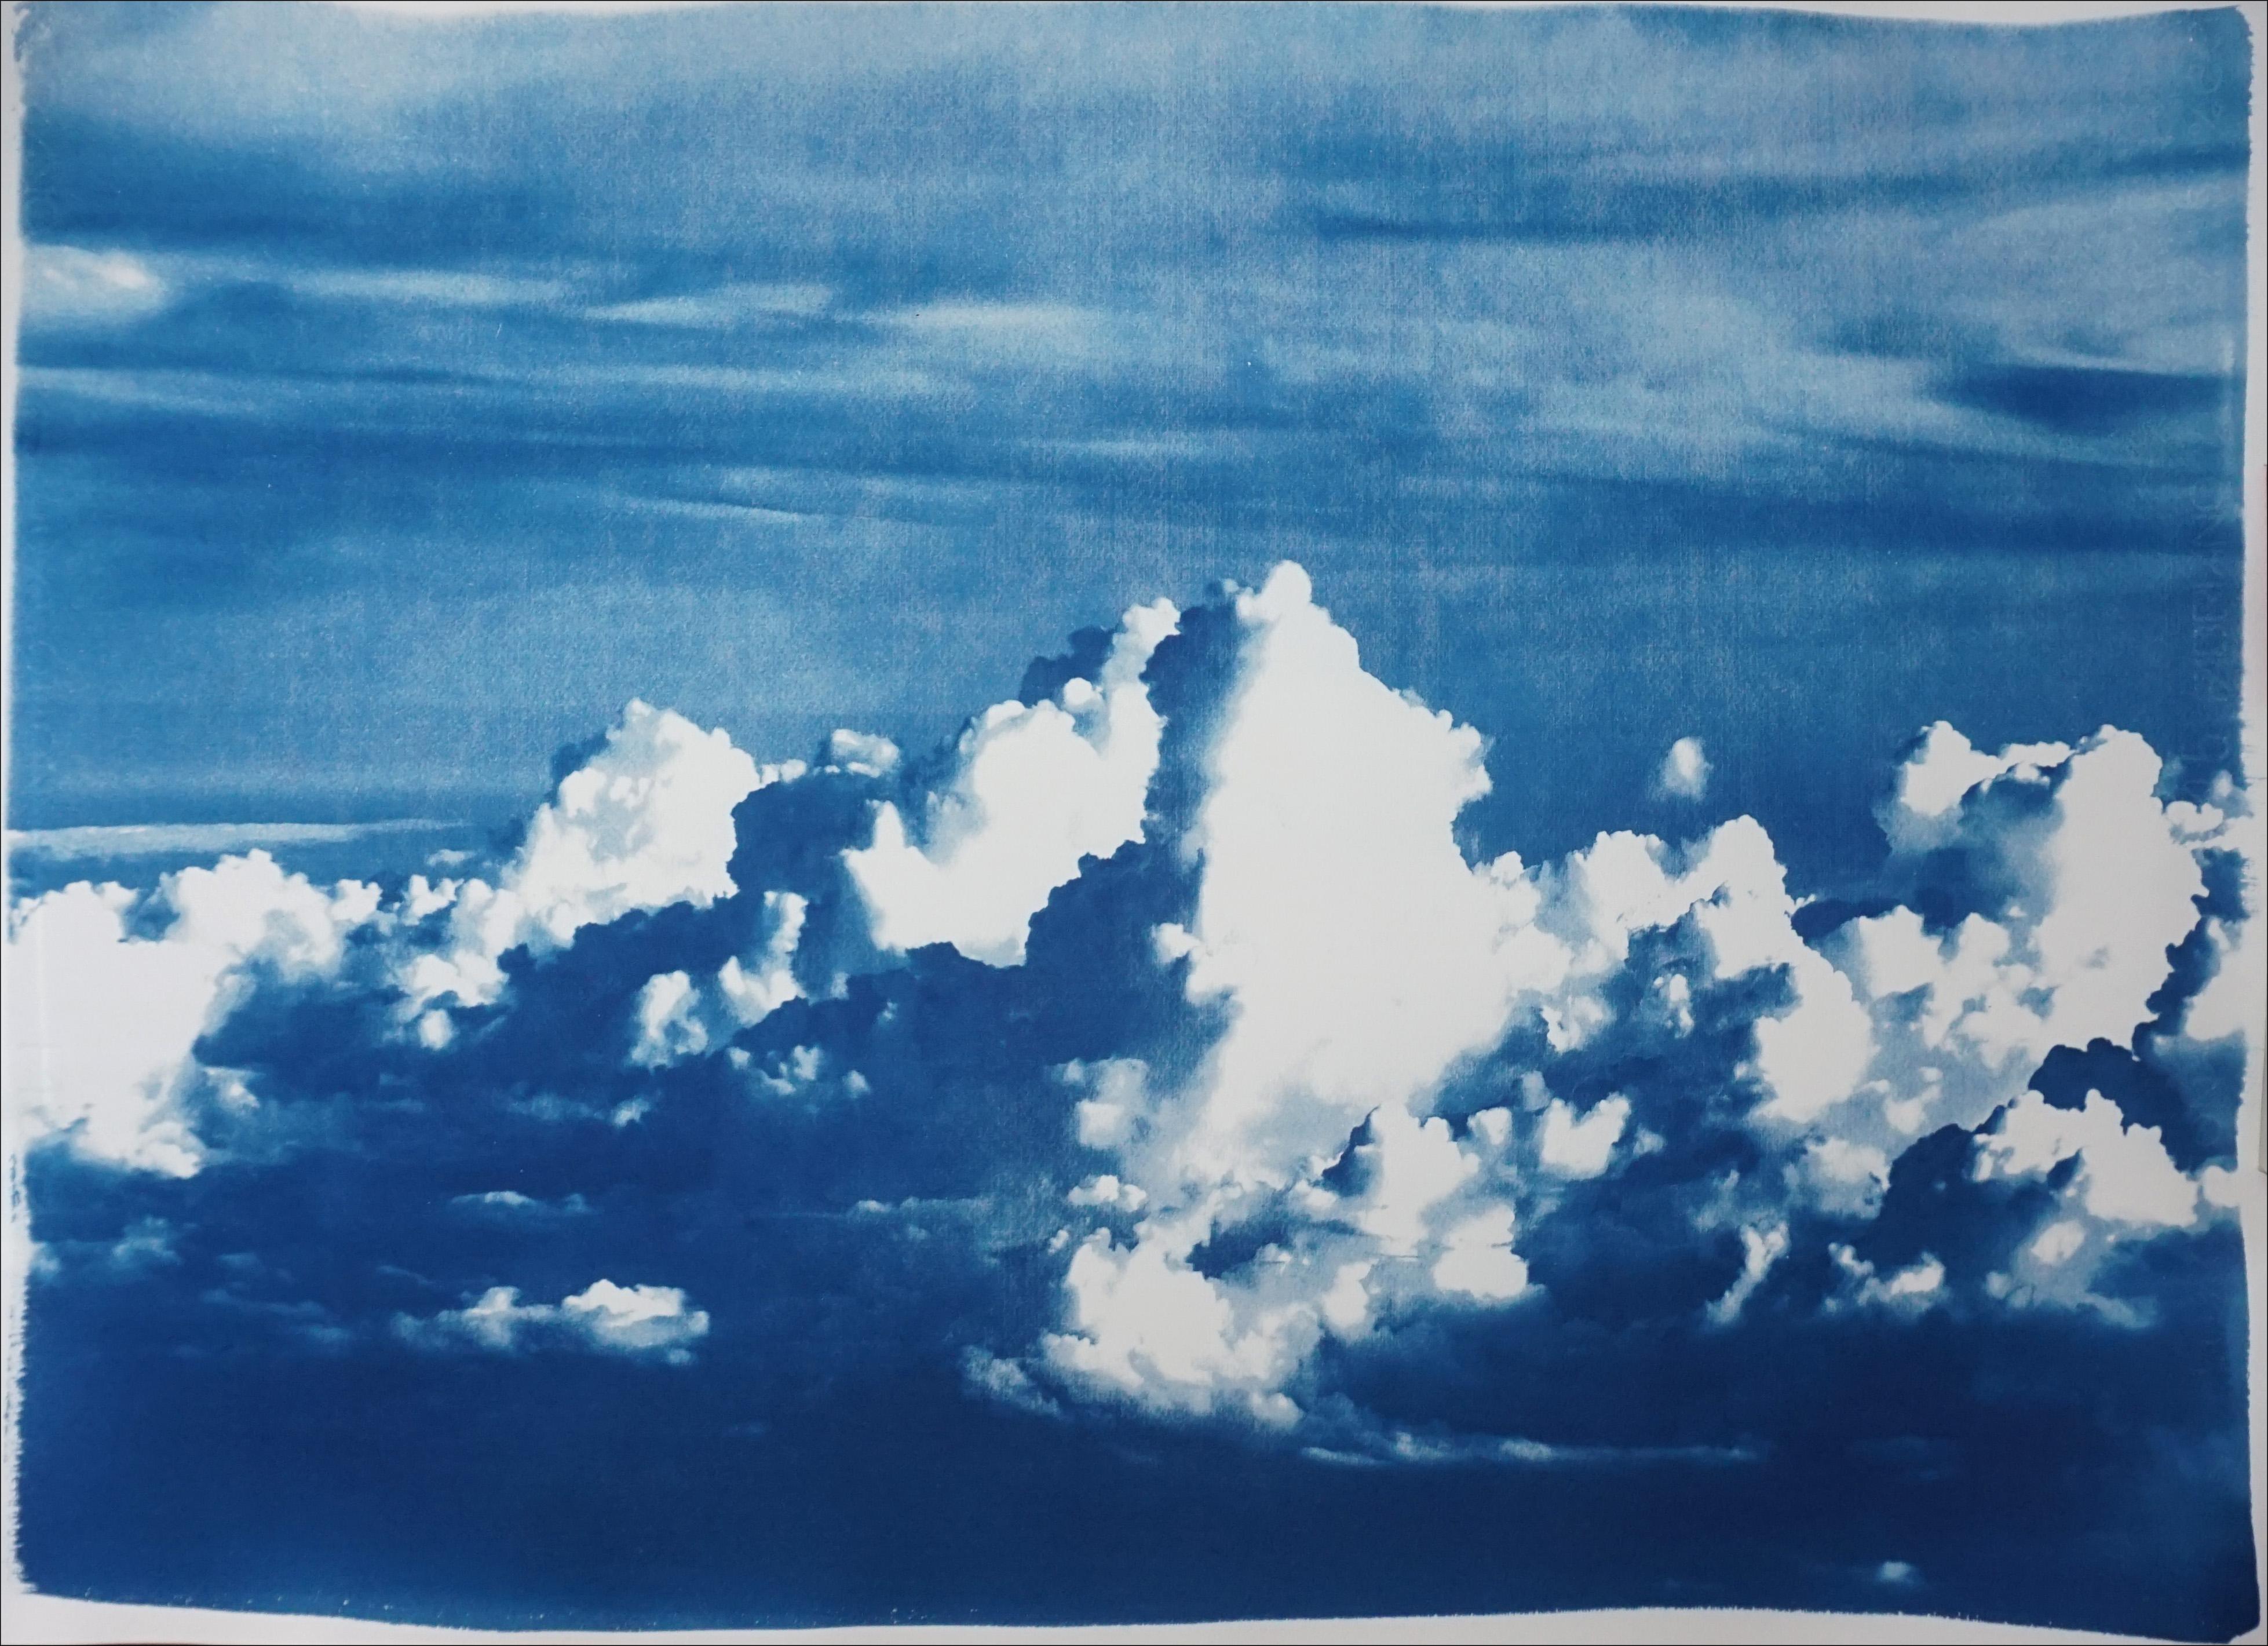 Blustery Clouds, Stormy Sky Landscape, Blue Tones, Extra Large Cyanotype, Paper